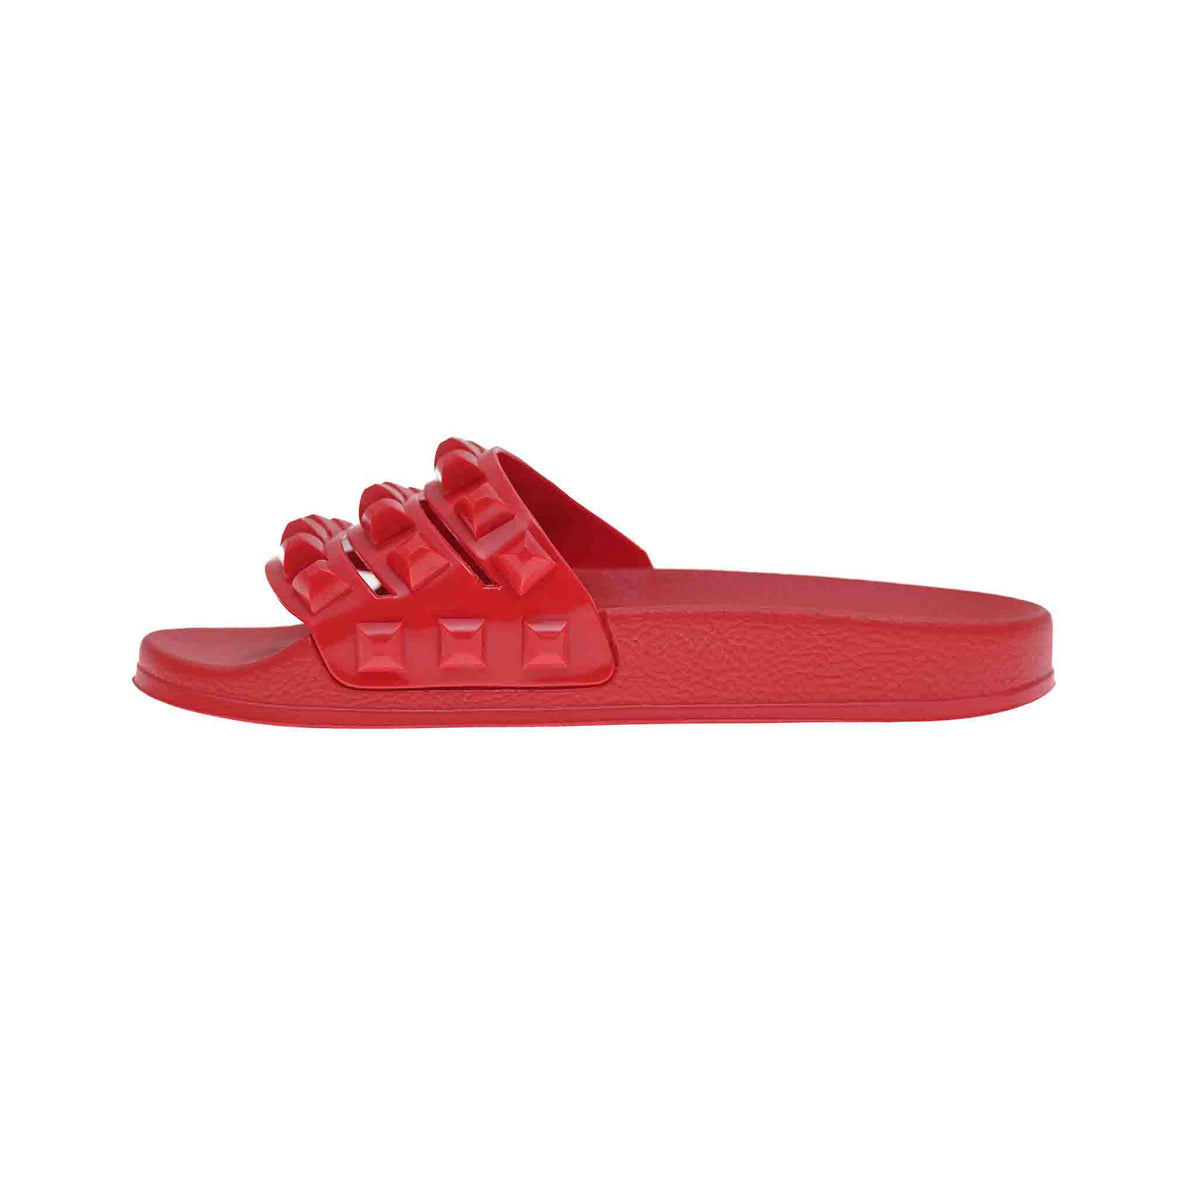 Red Red platform slide sandals from carmensol with a sandy beach and flip-flop make a beautiful day.